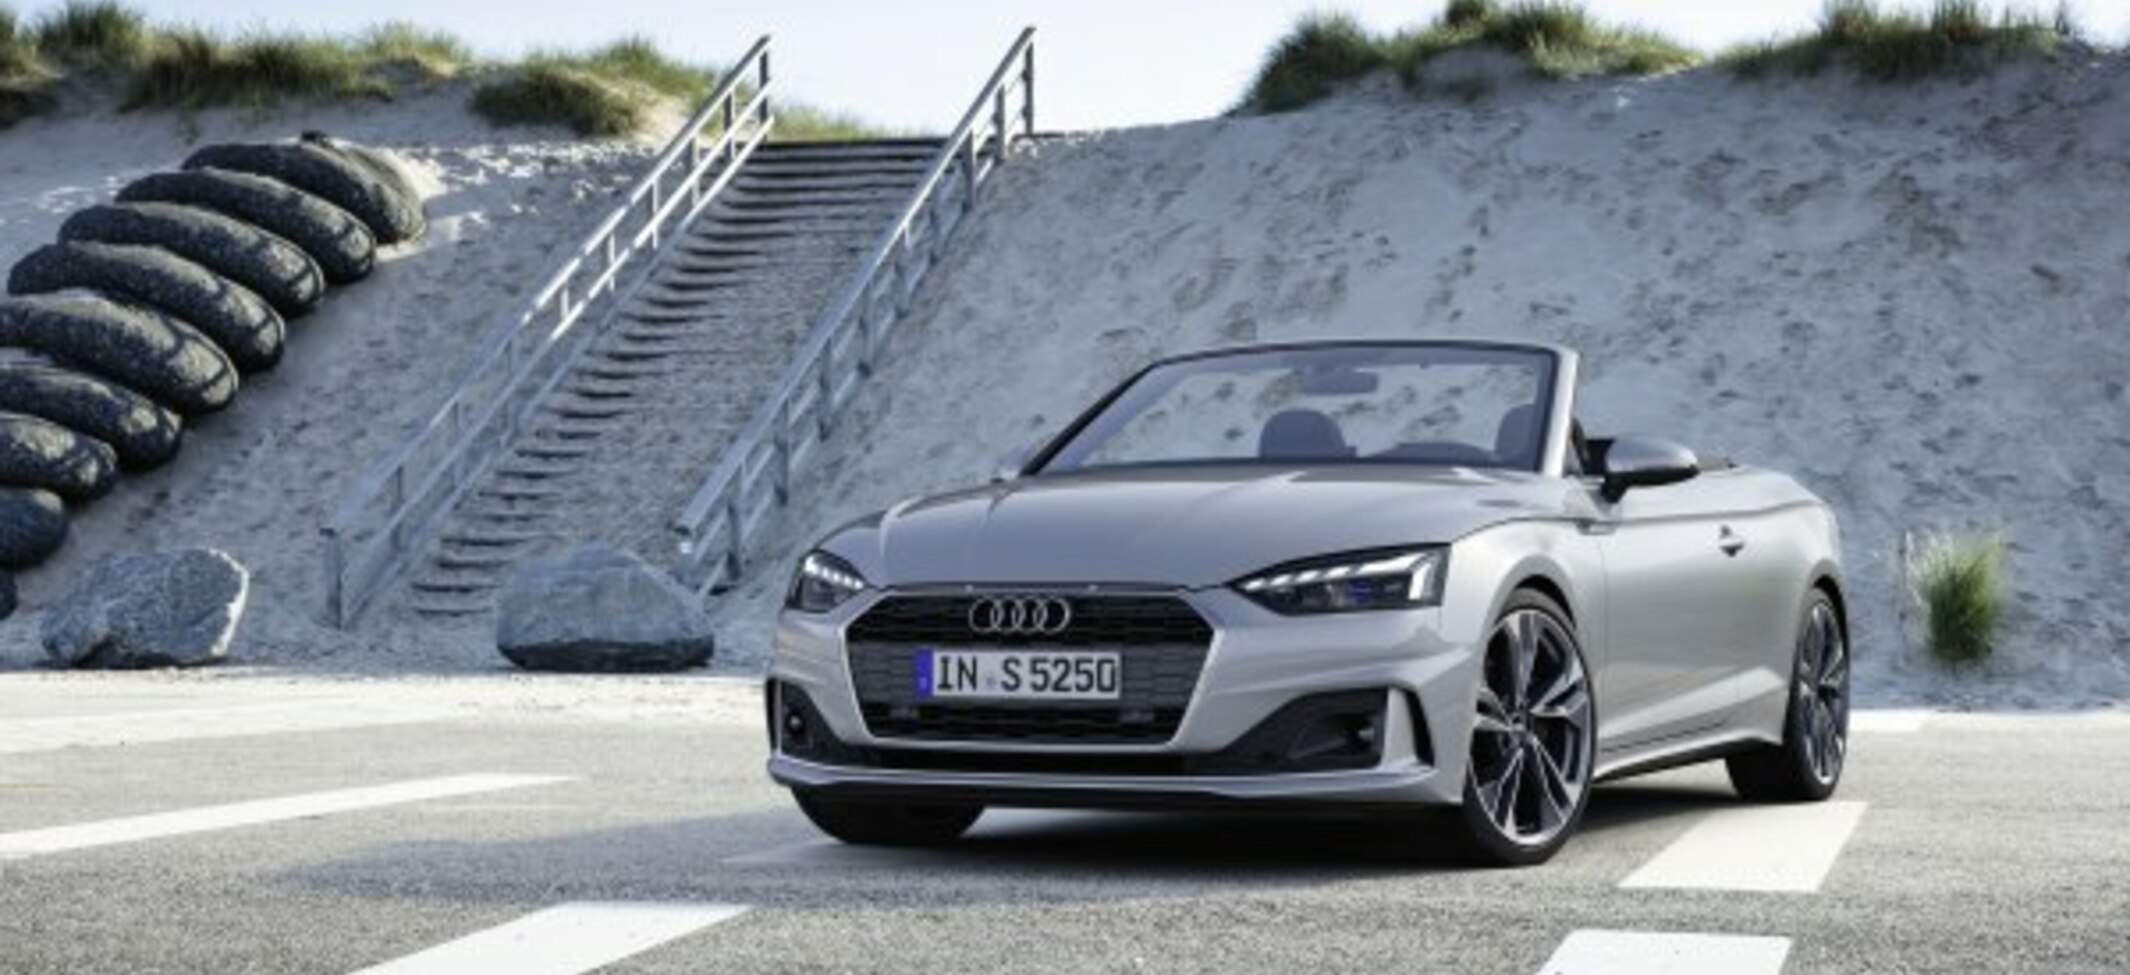 Audi A5 Cabriolet (F5, facelift 2019) 35 TFSI (150 Hp) MHEV S tronic 2020, 2021 